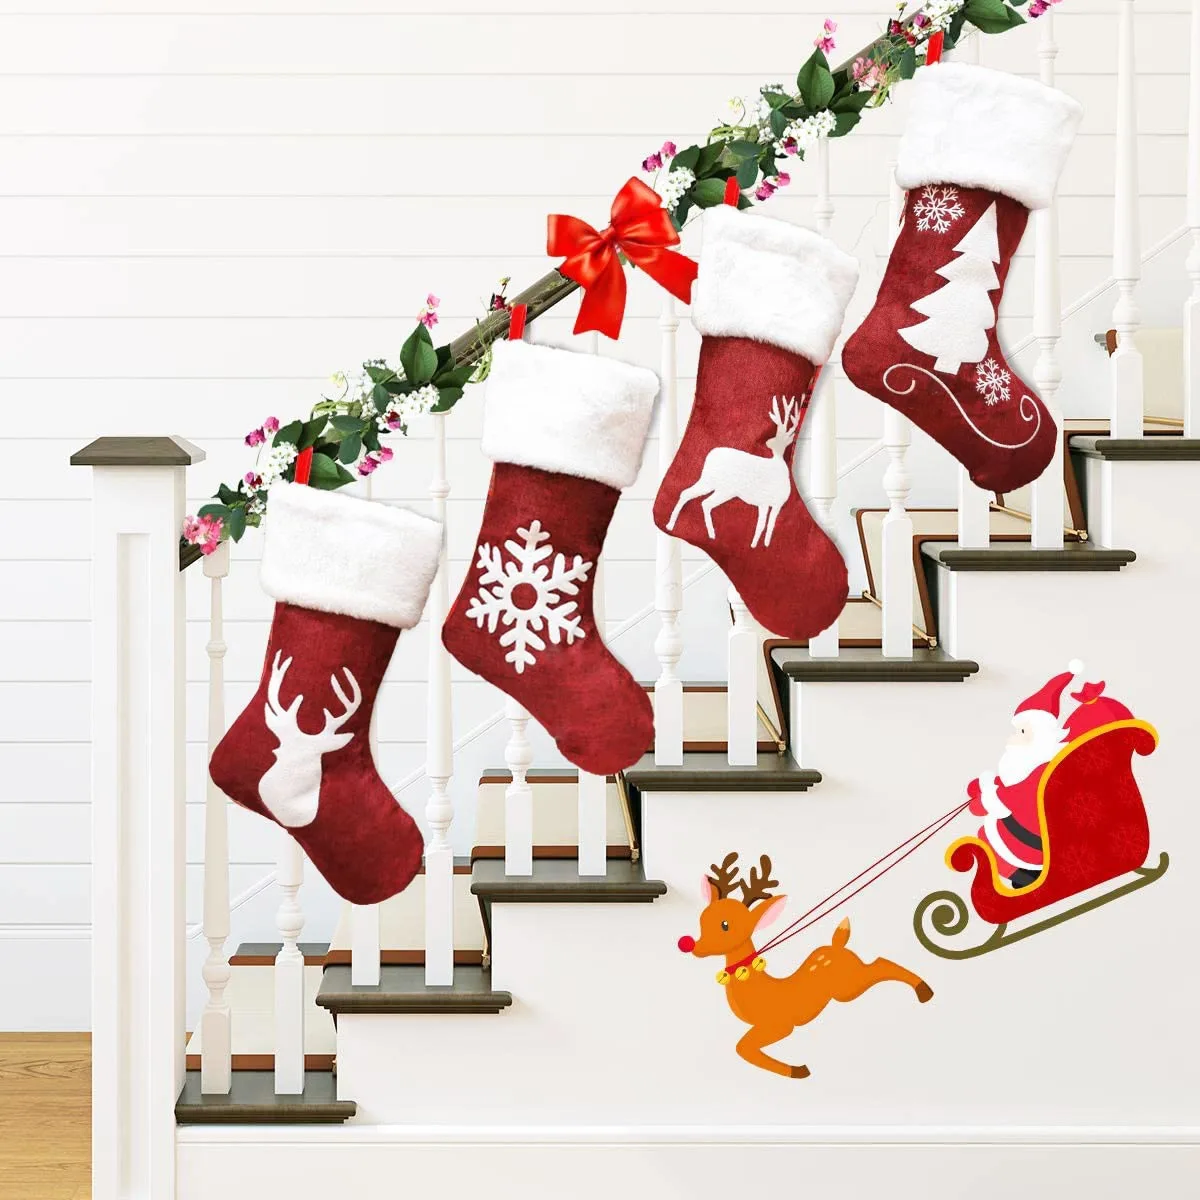 2023 Christmas Stockings Sock Wreat Santa Stockings Decorations for Home Outdoor 2024 New Year Xmas Holiday Cute Decorating 2pcs